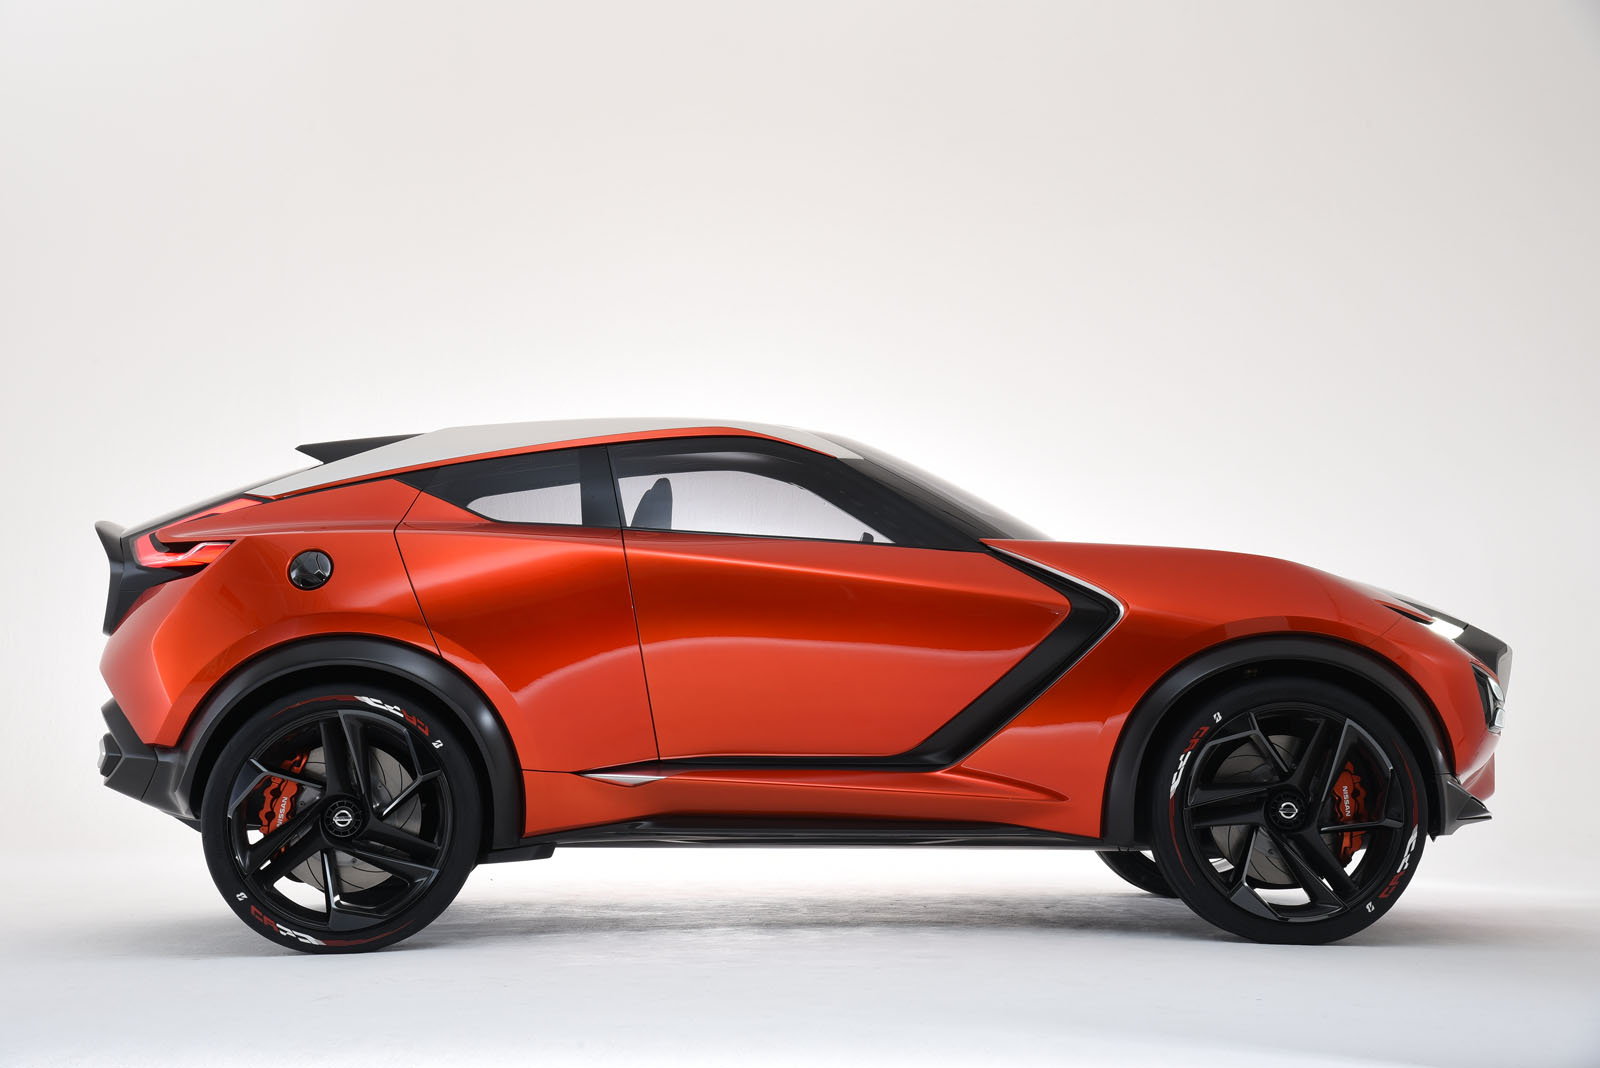 Nissan Gripz concept previews new Z crossover